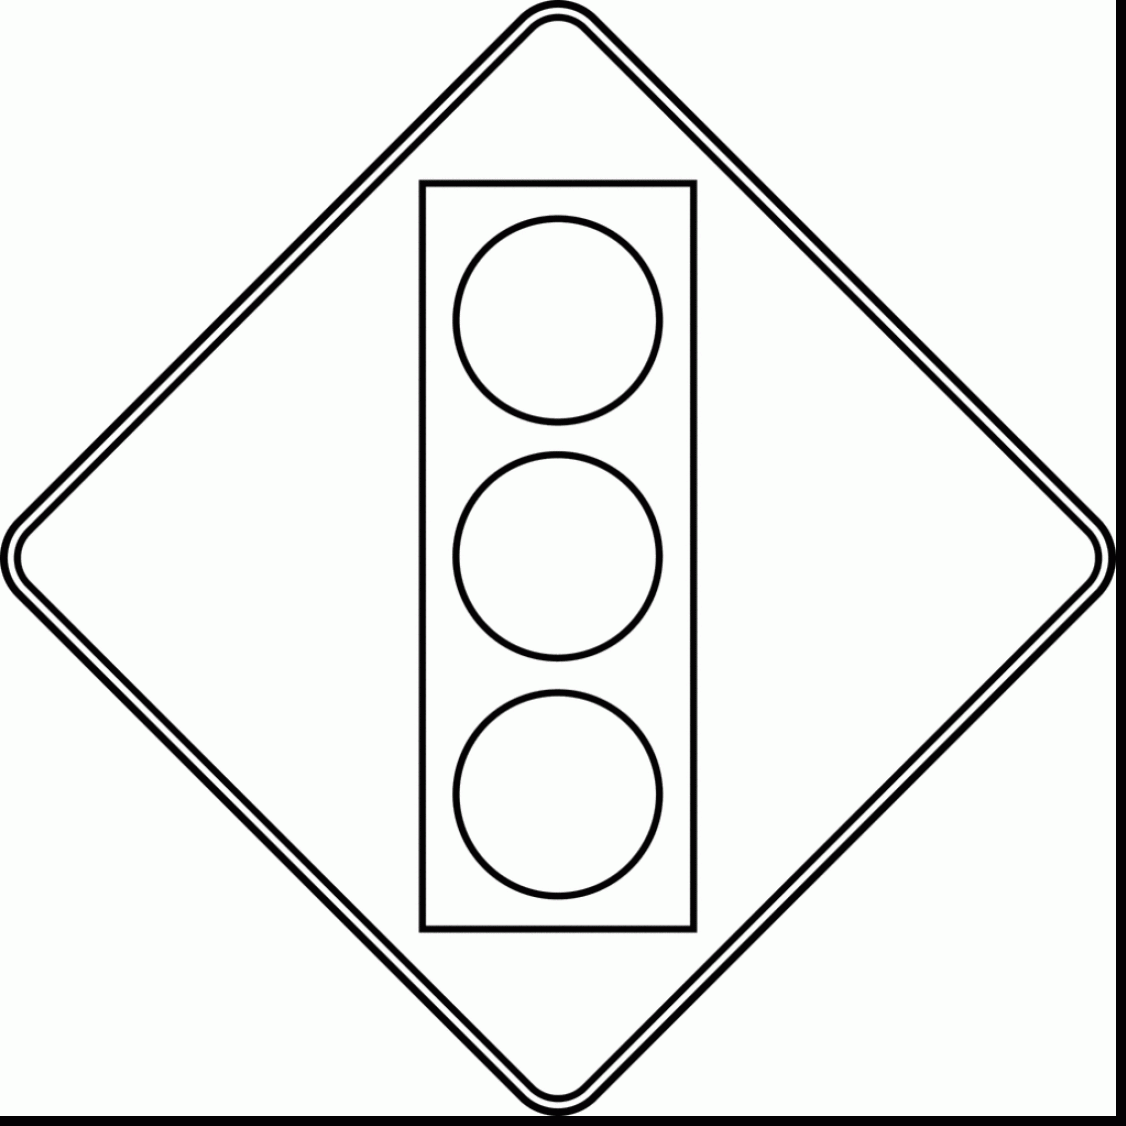 Traffic Light Coloring Pages - ClipArt Best